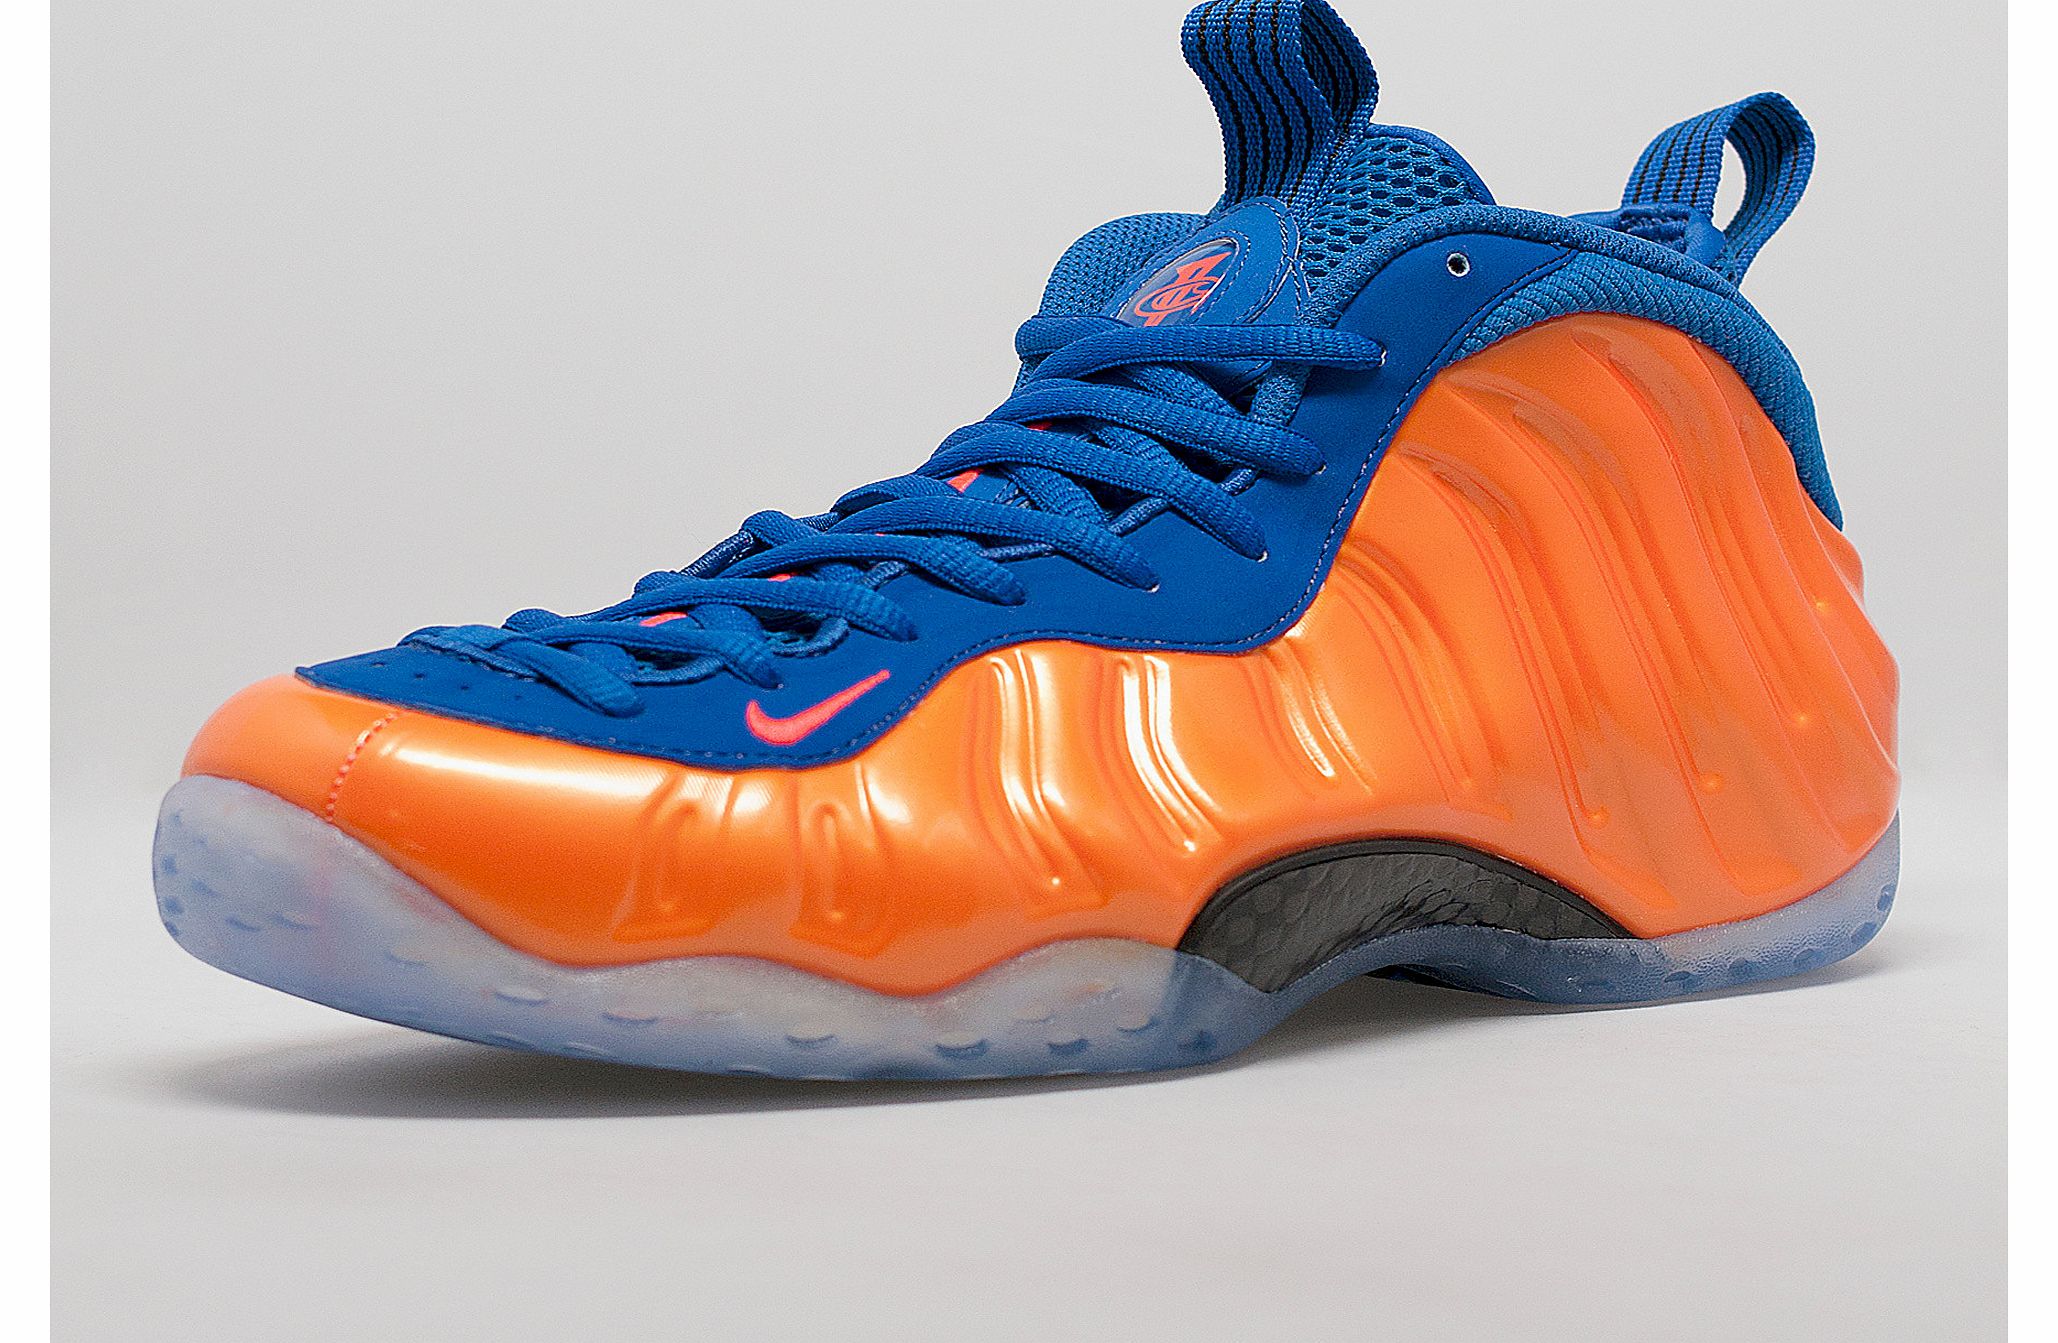 Nike Air Foamposite One - review, compare prices, buy online